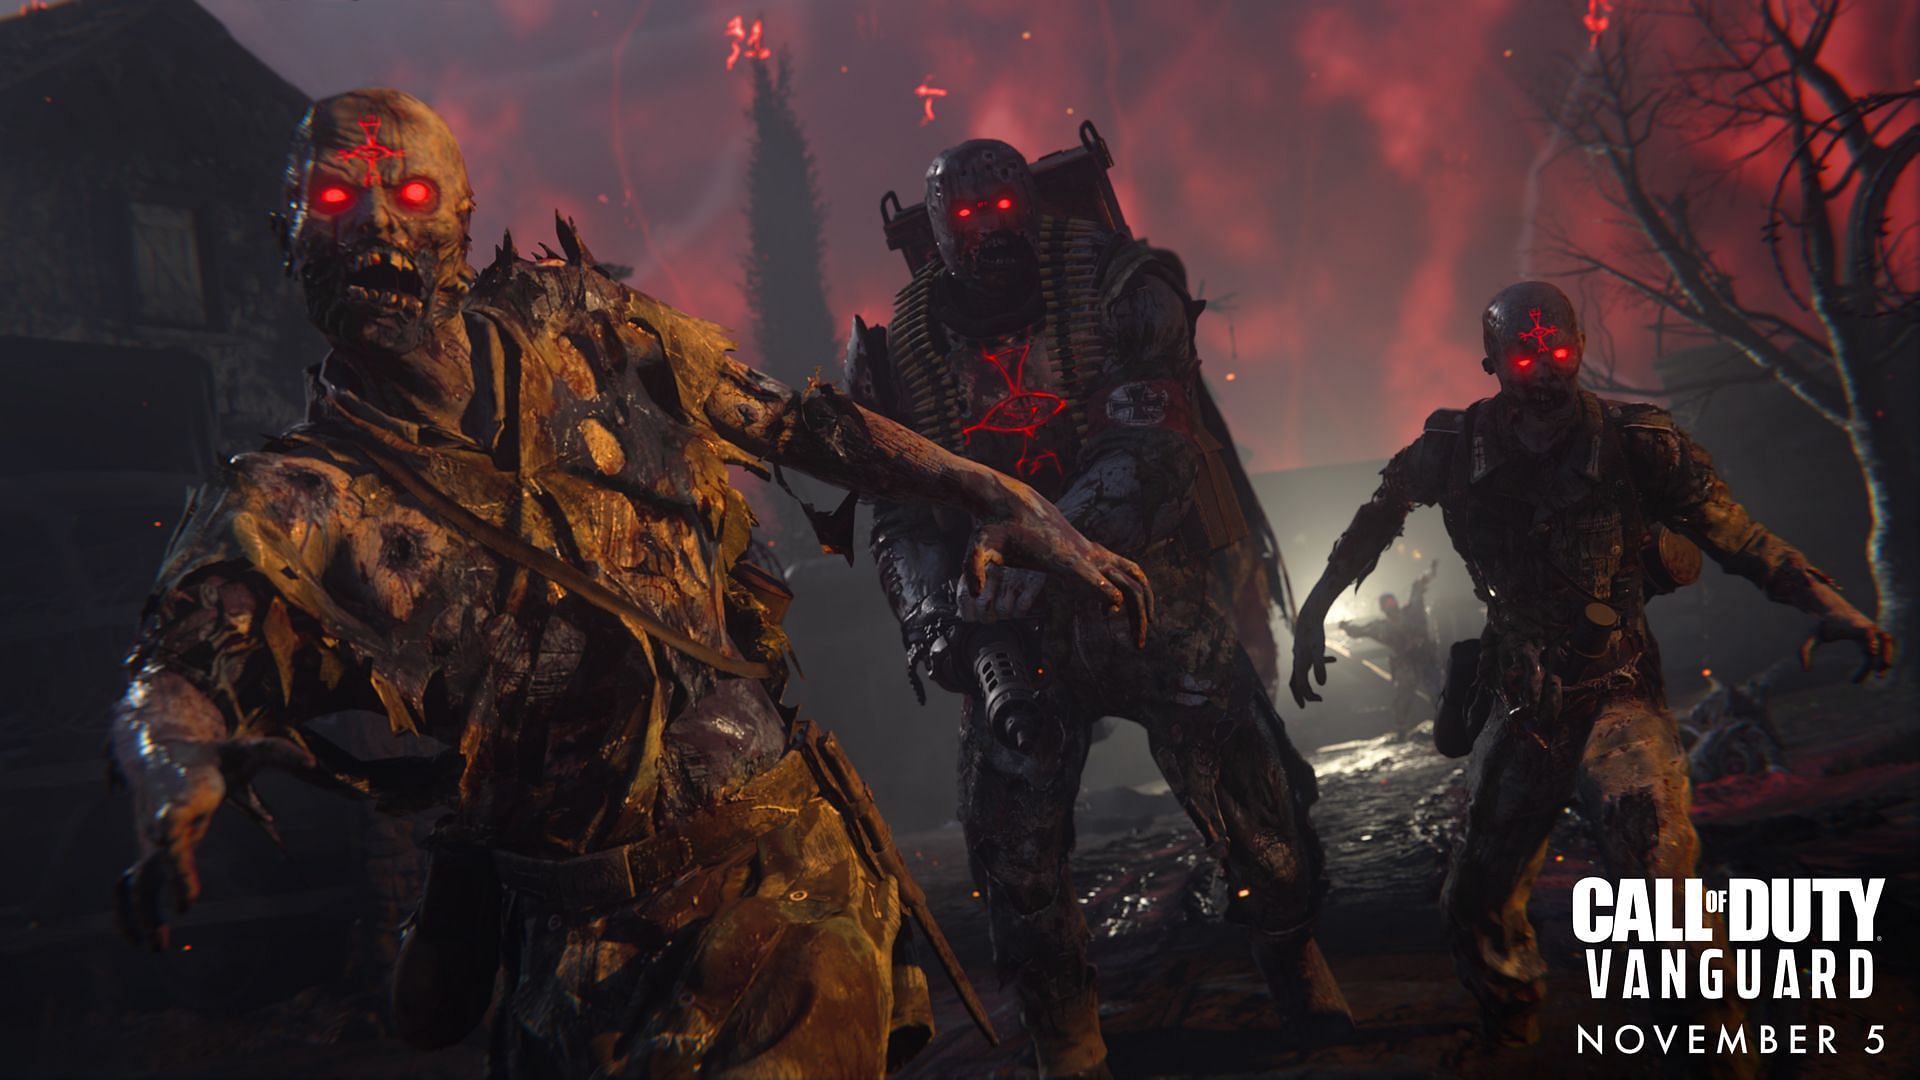 Call of Duty: Vanguard Zombies (Image by Activision)